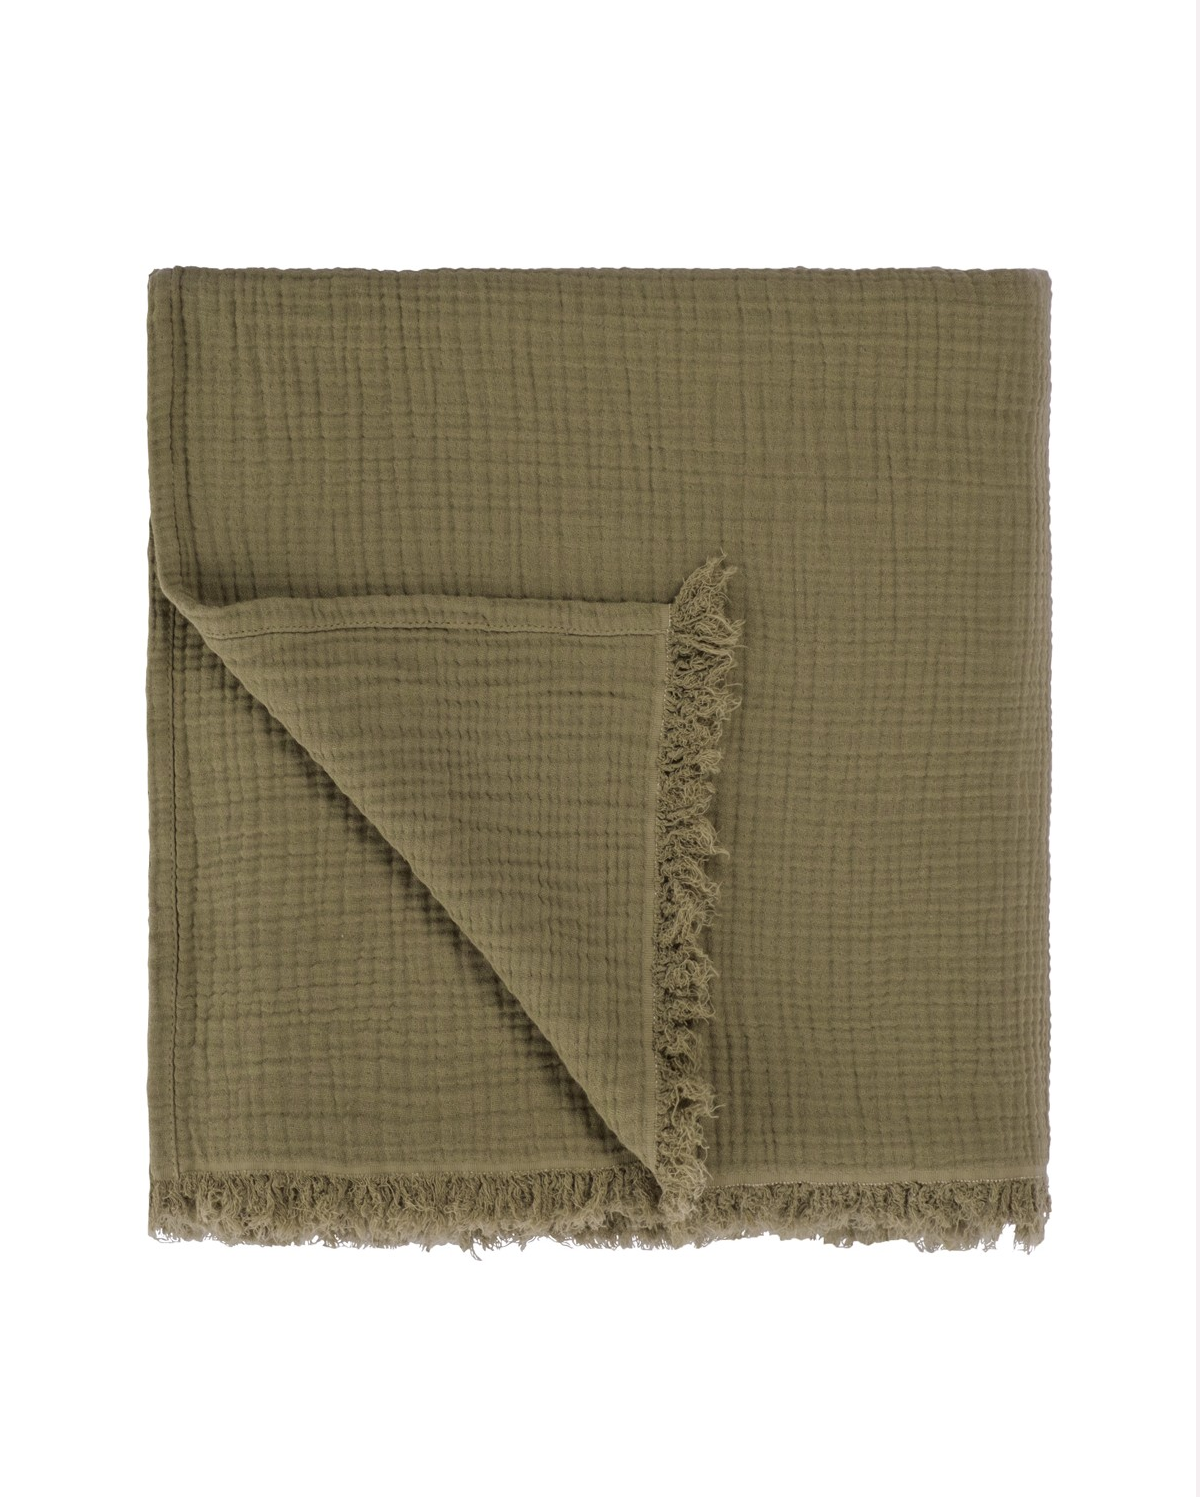 Cocoon Muslin Cotton Blanket- Timber